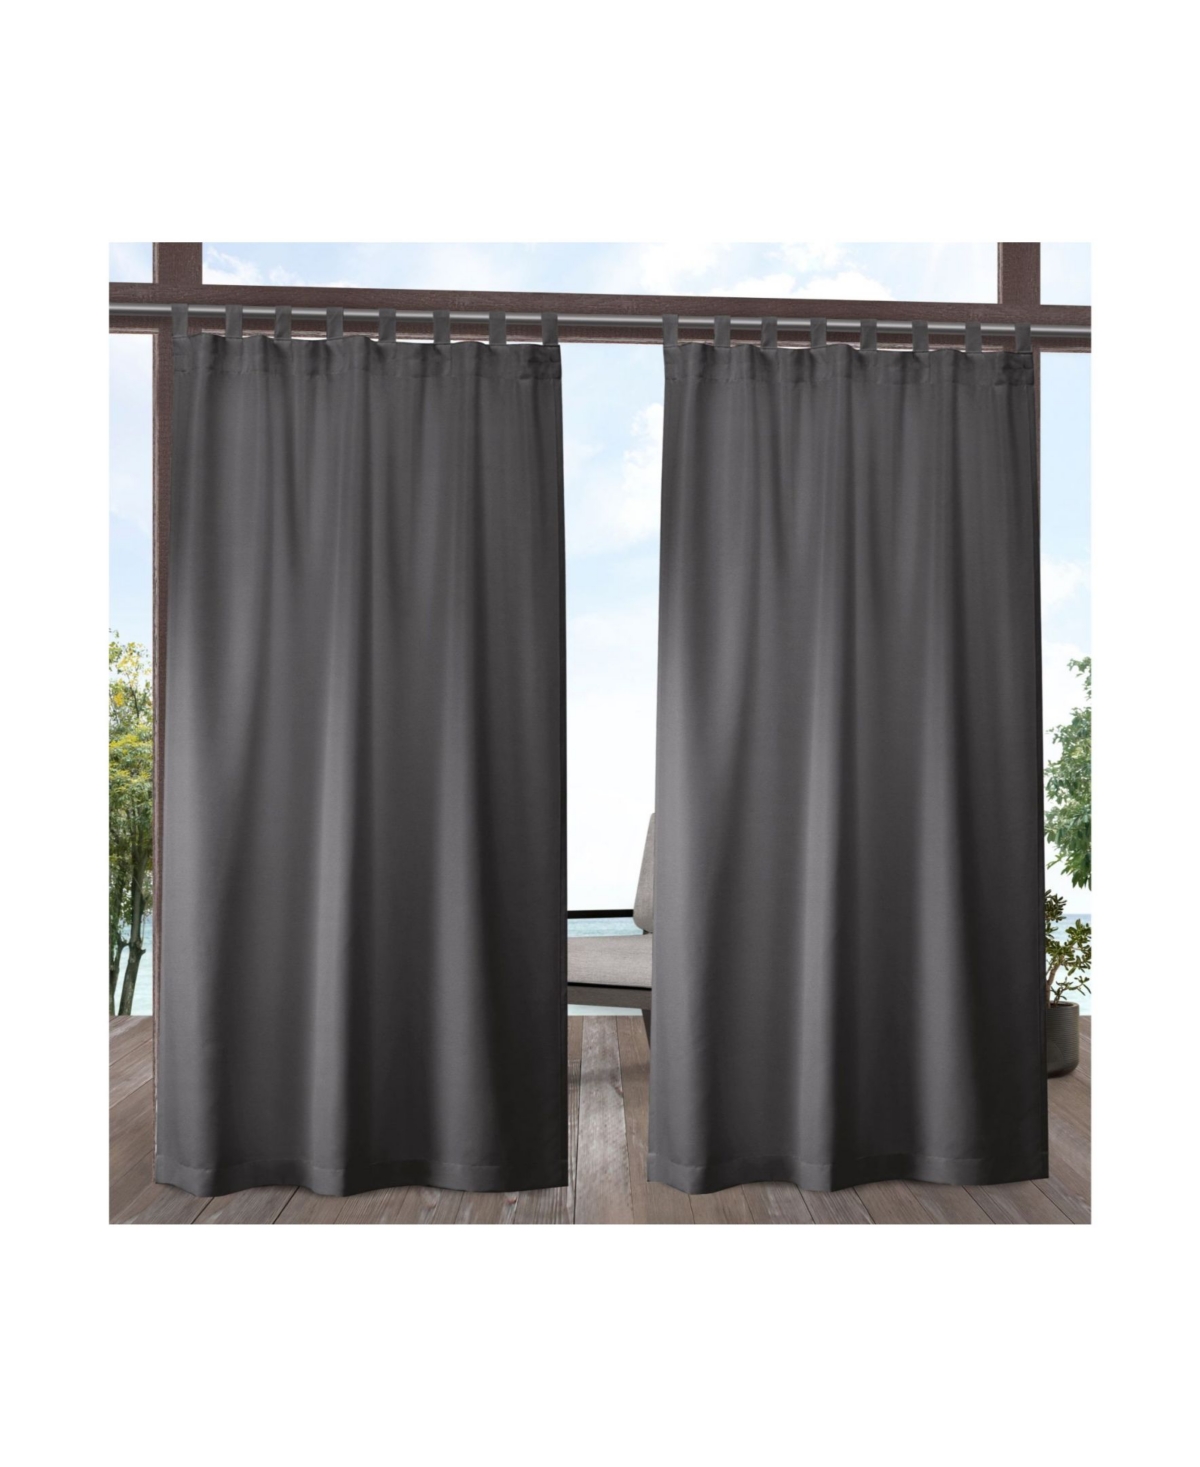 Curtains Indoor - Outdoor Solid Cabana Tab Top Curtain Panel Pair, 54" x 108" - Multi